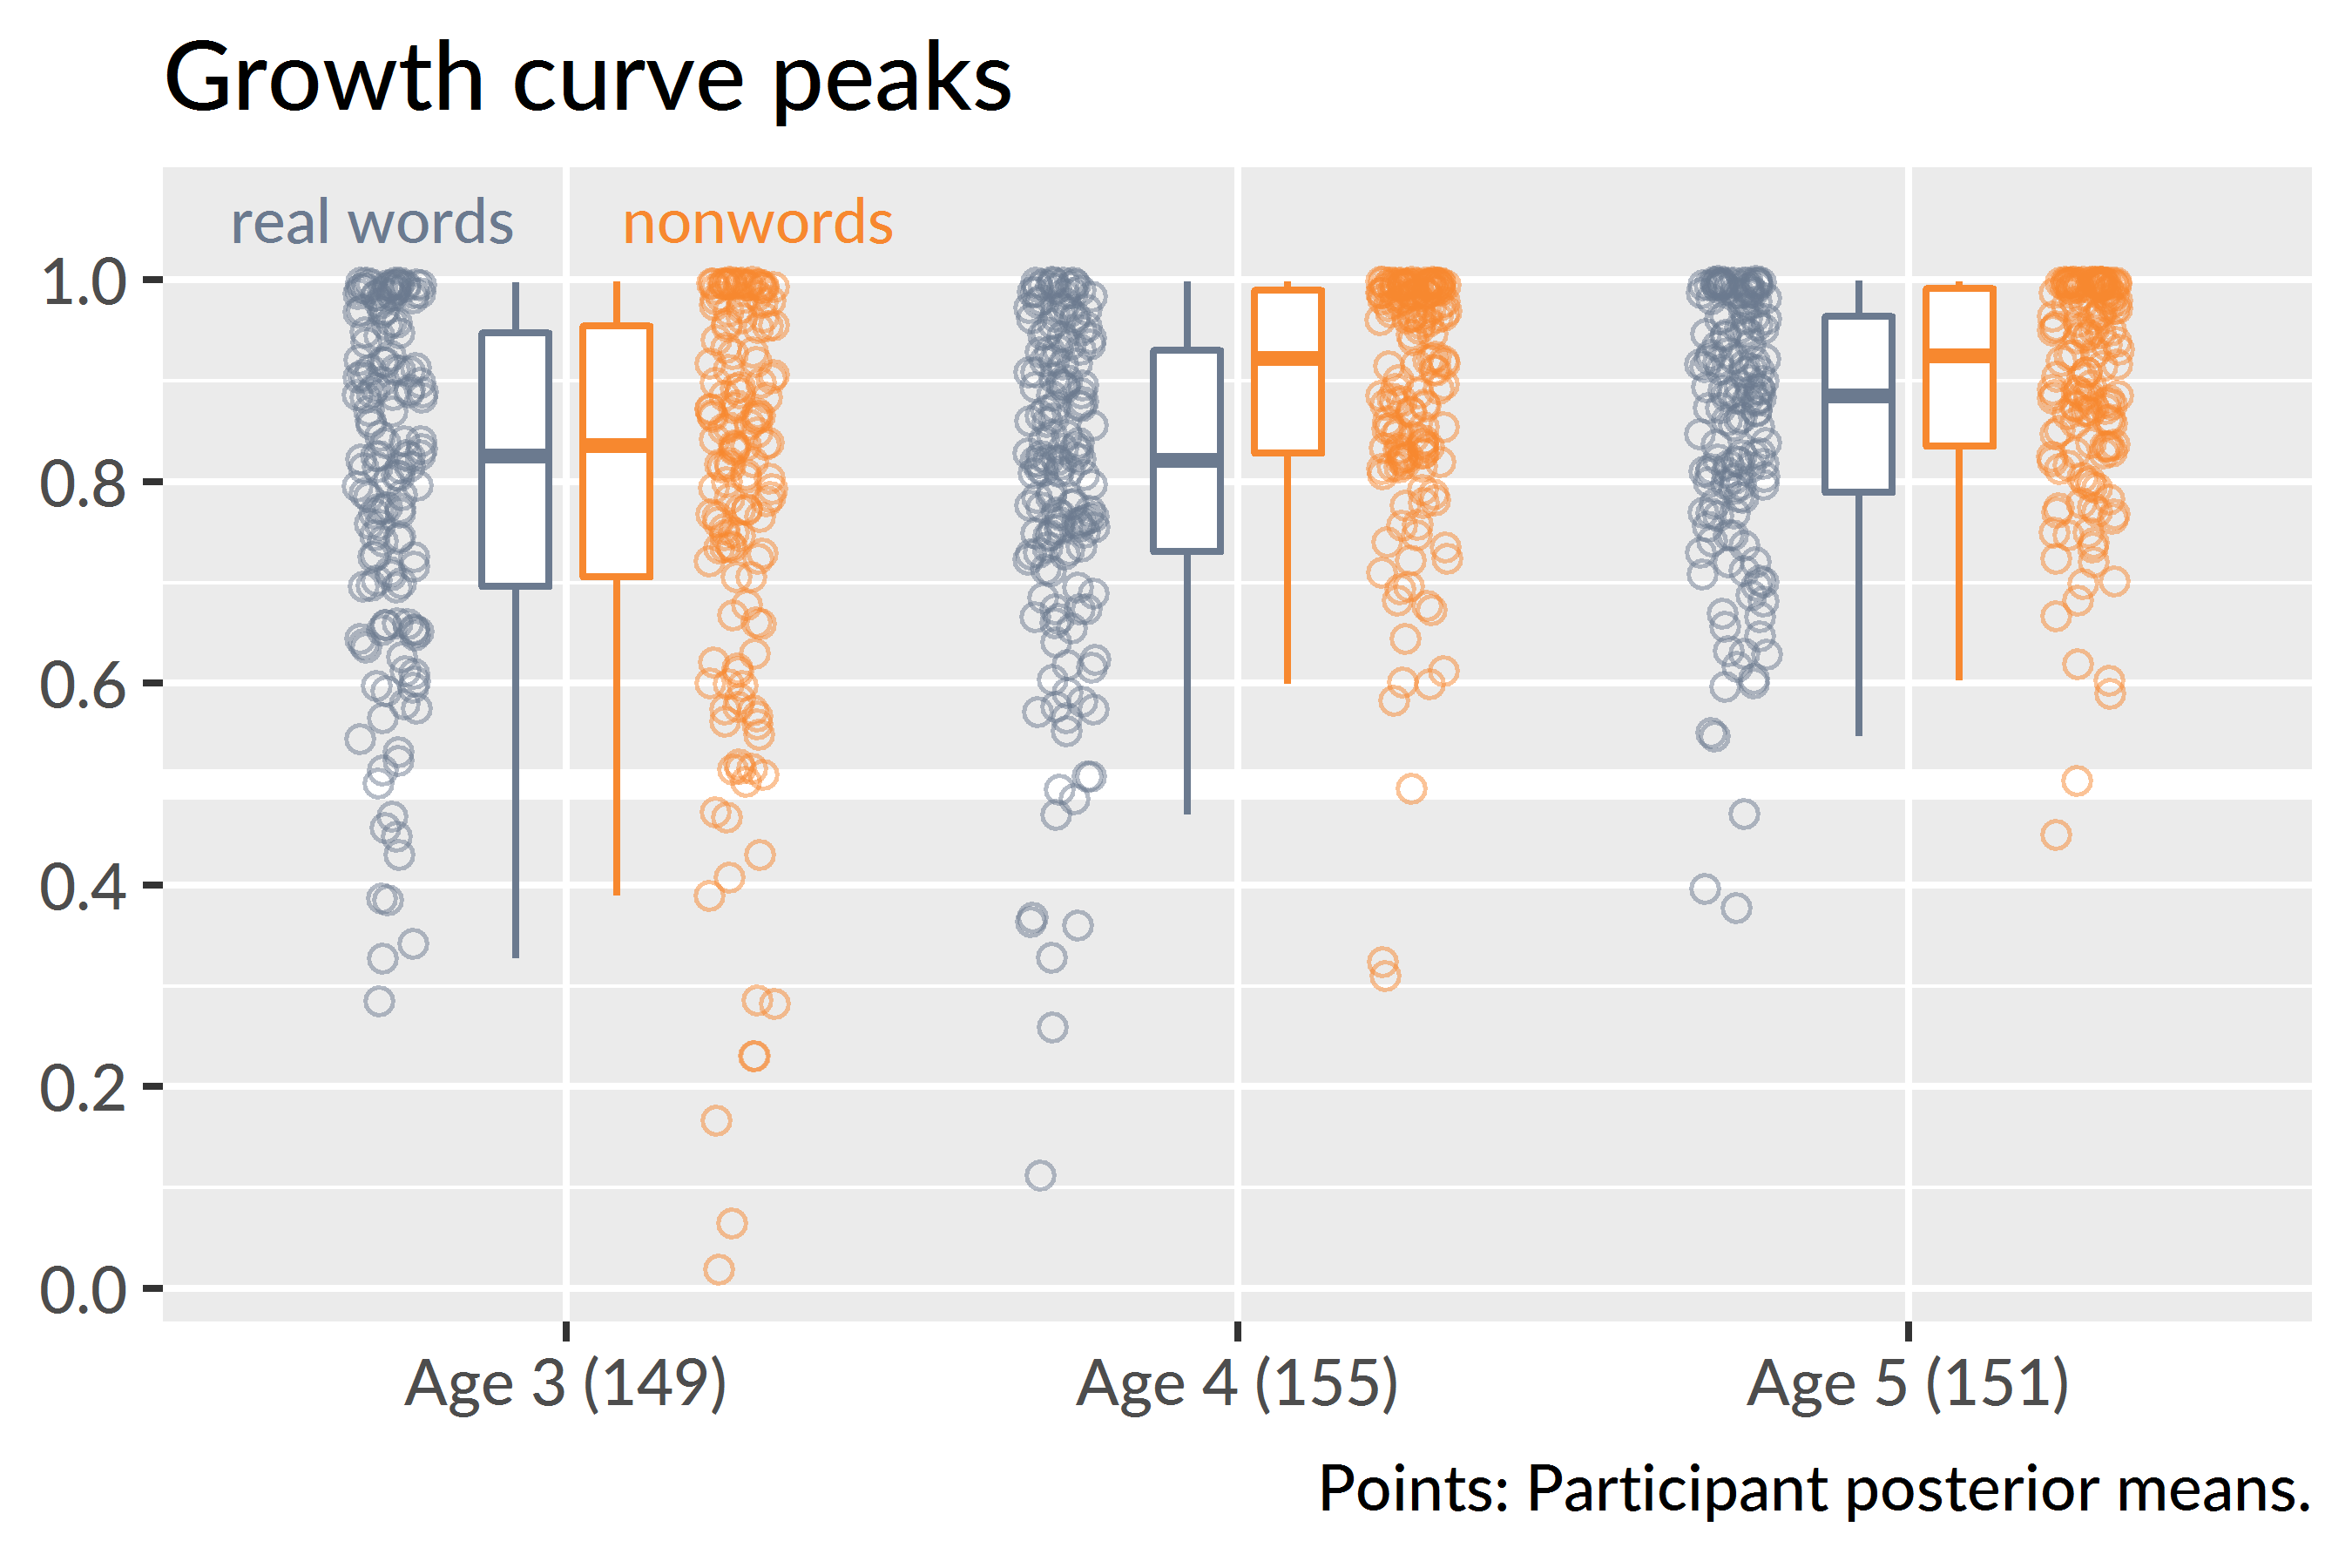 Growth curve peaks by child, condition and year of the study. The movement of the medians conveys how the nonword peaks effect increased from age 3 to age 4 and the real word peaks increased from age 4 to age 5. The piling of points near the 1.0 line depicts how children reached ceiling performance on this task.